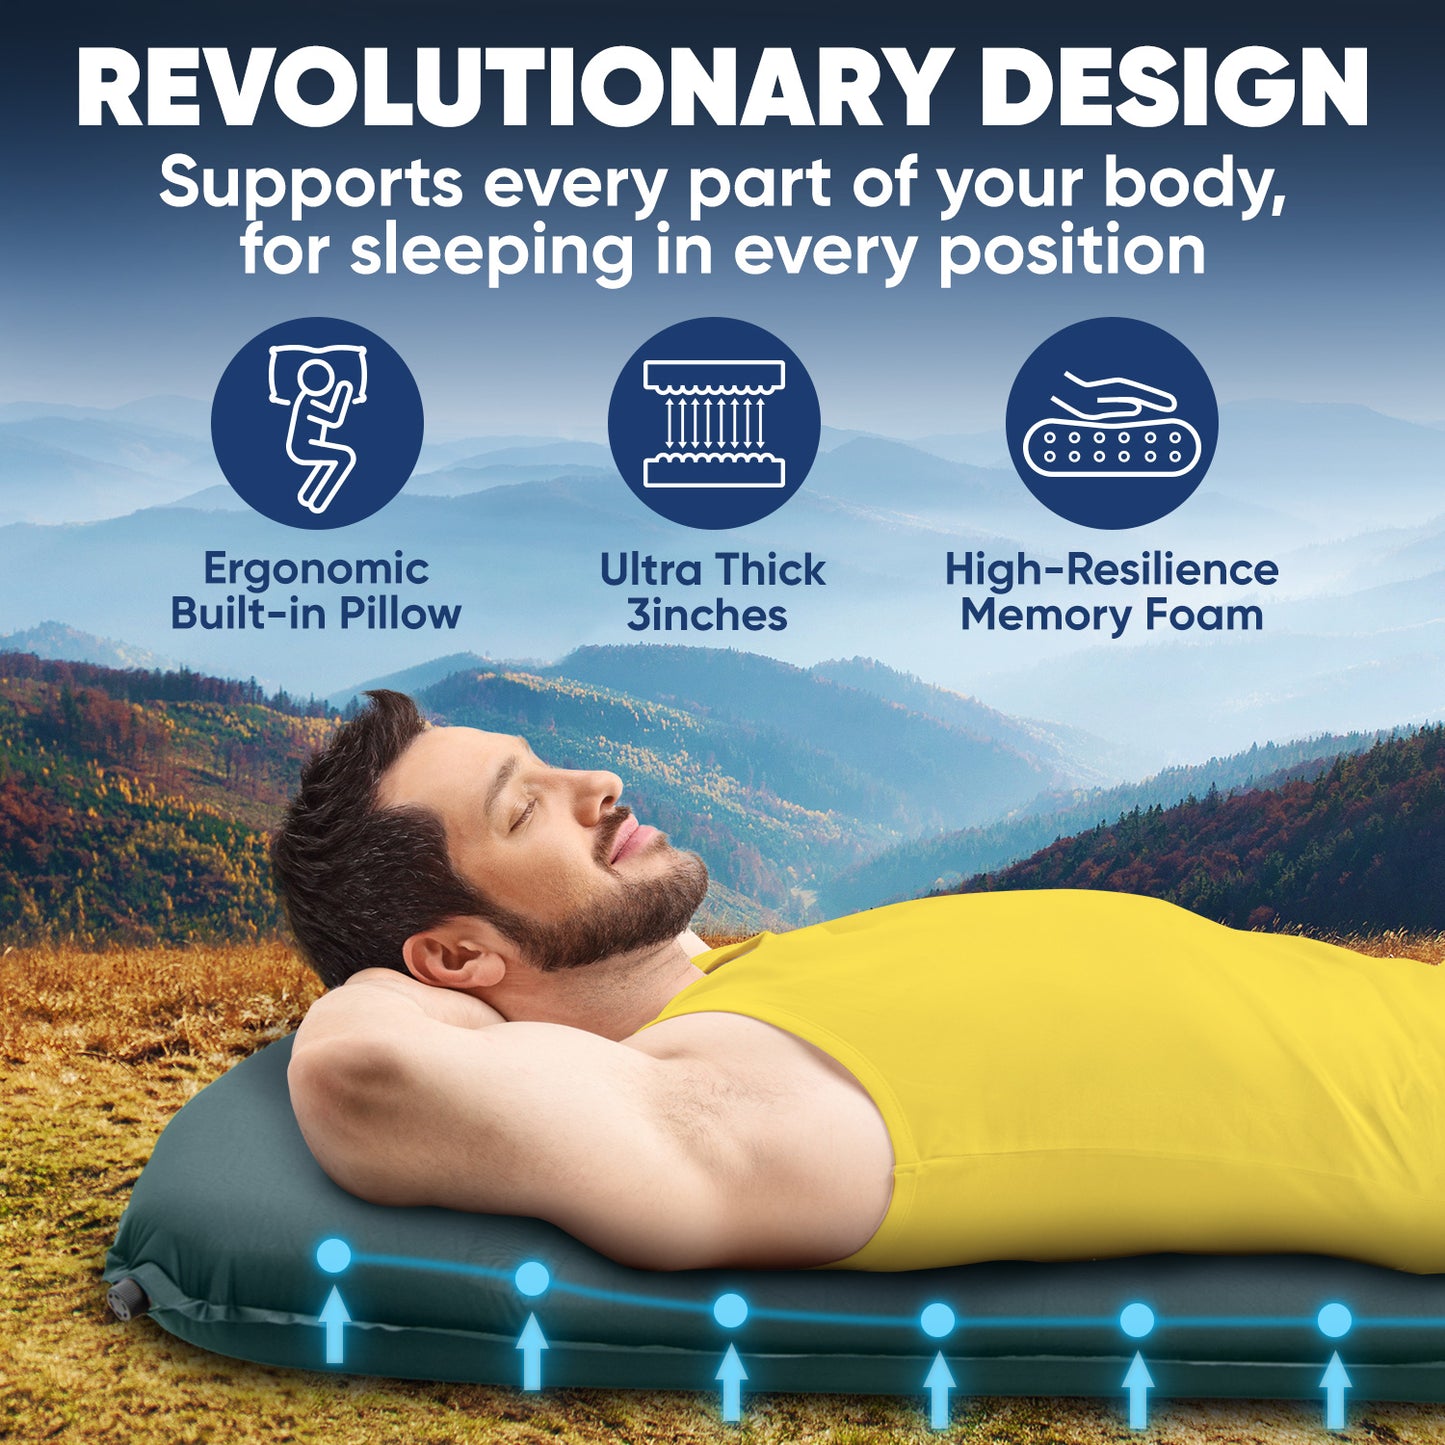 A model laying on the powerlix sleeping pad with the ergonomic support points super imposed. Upper text reads, "Revolutionary deisgn. Supports every part of your body, for sleeping in every position. Ergonomic pillow, Ultra thick 3 inches, High resilience Memory foam."